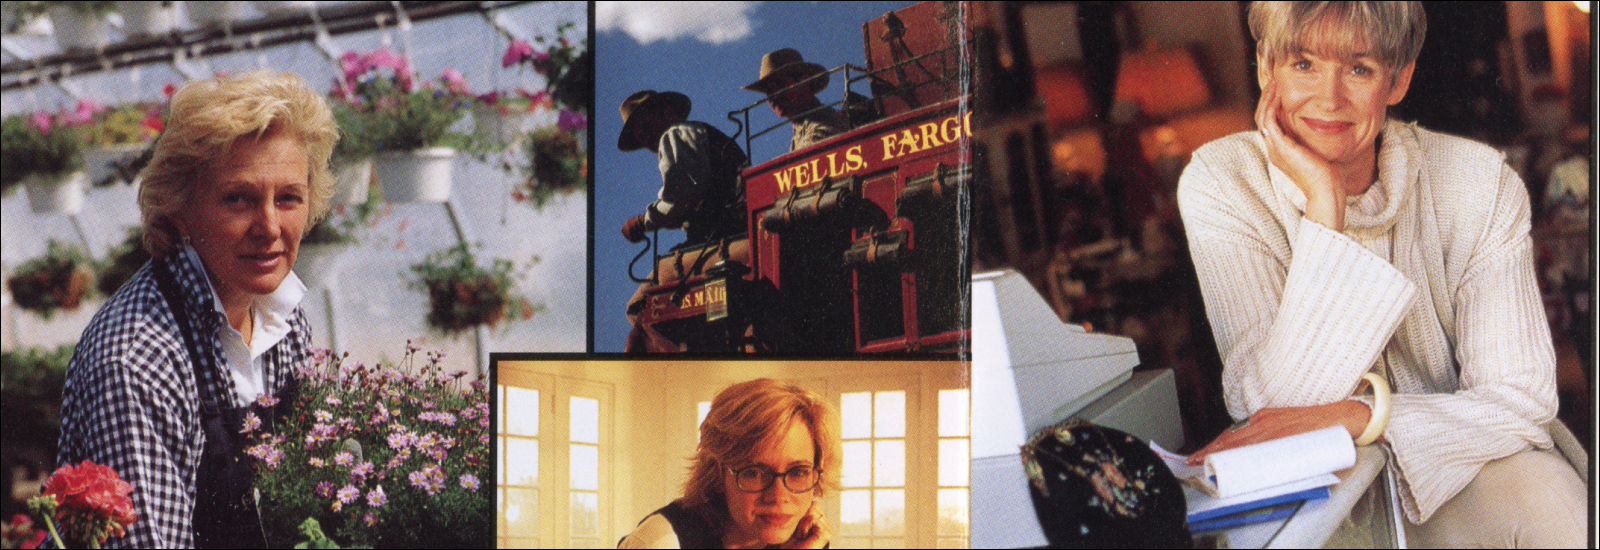 Photos from a 1998 Wells Fargo ad showing women business owners and the Wells Fargo stagecoach.